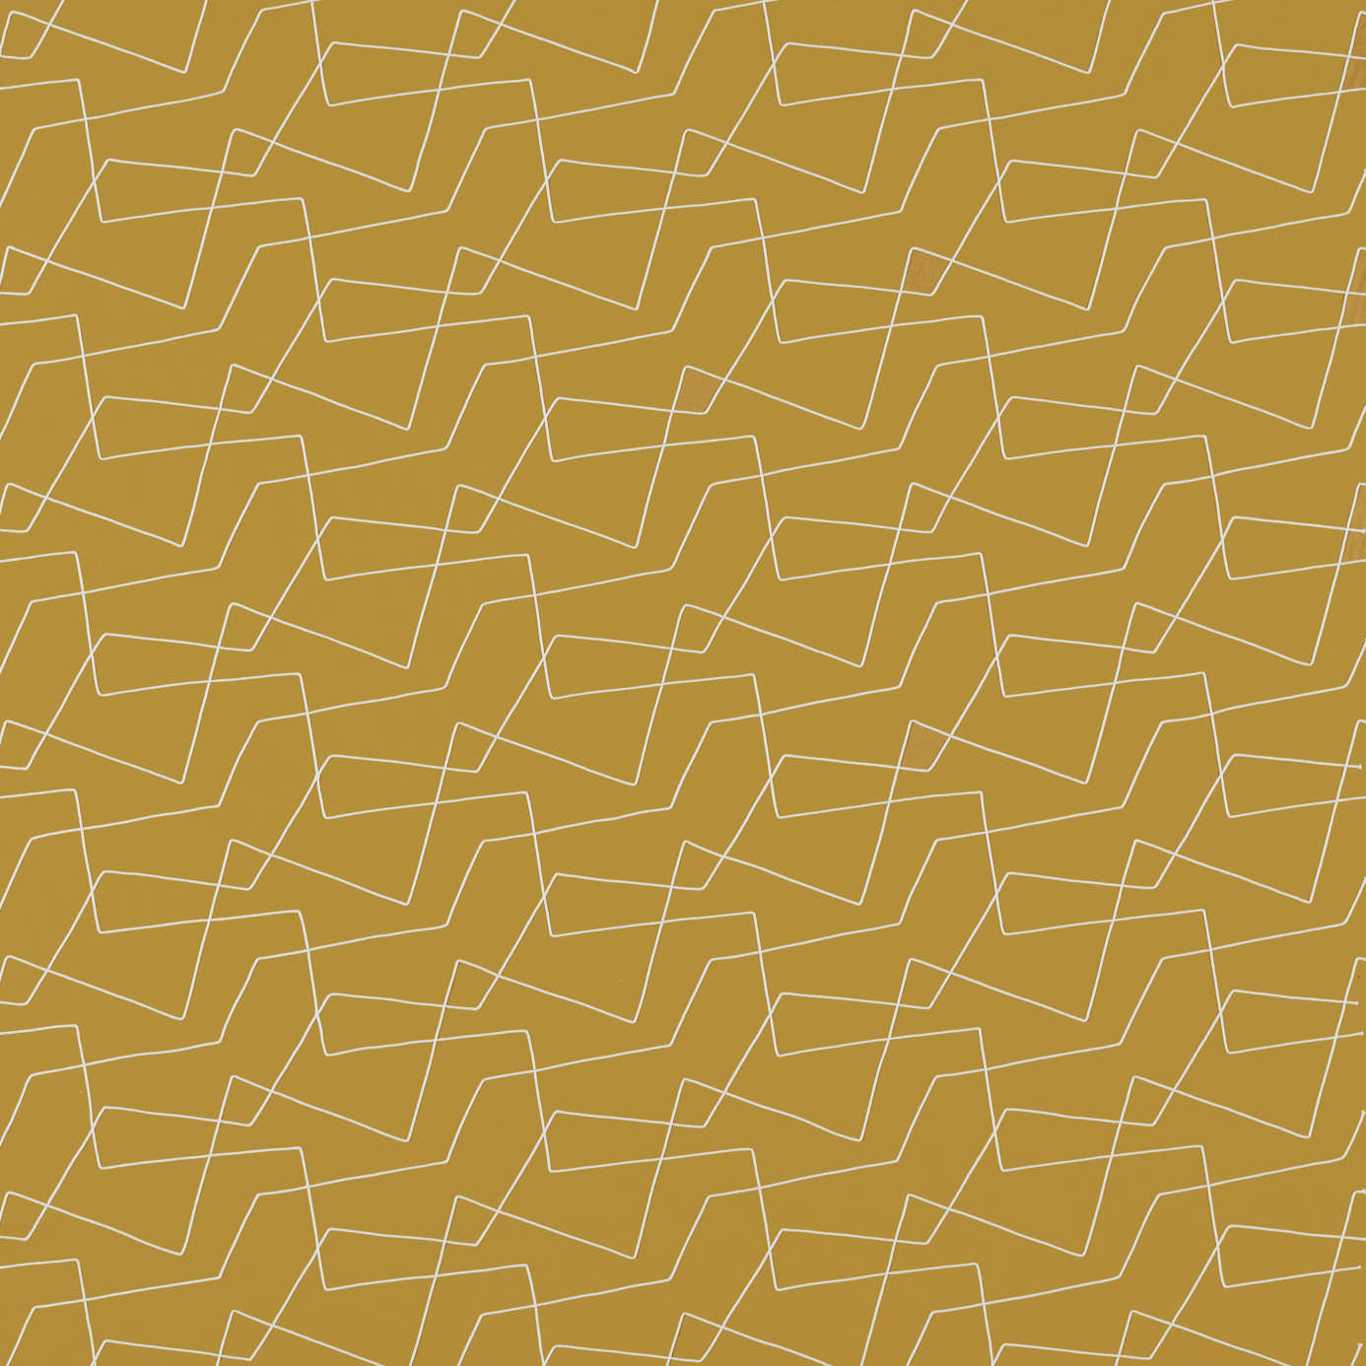 Extensity Saffron/ Pearl Fabric by HAR